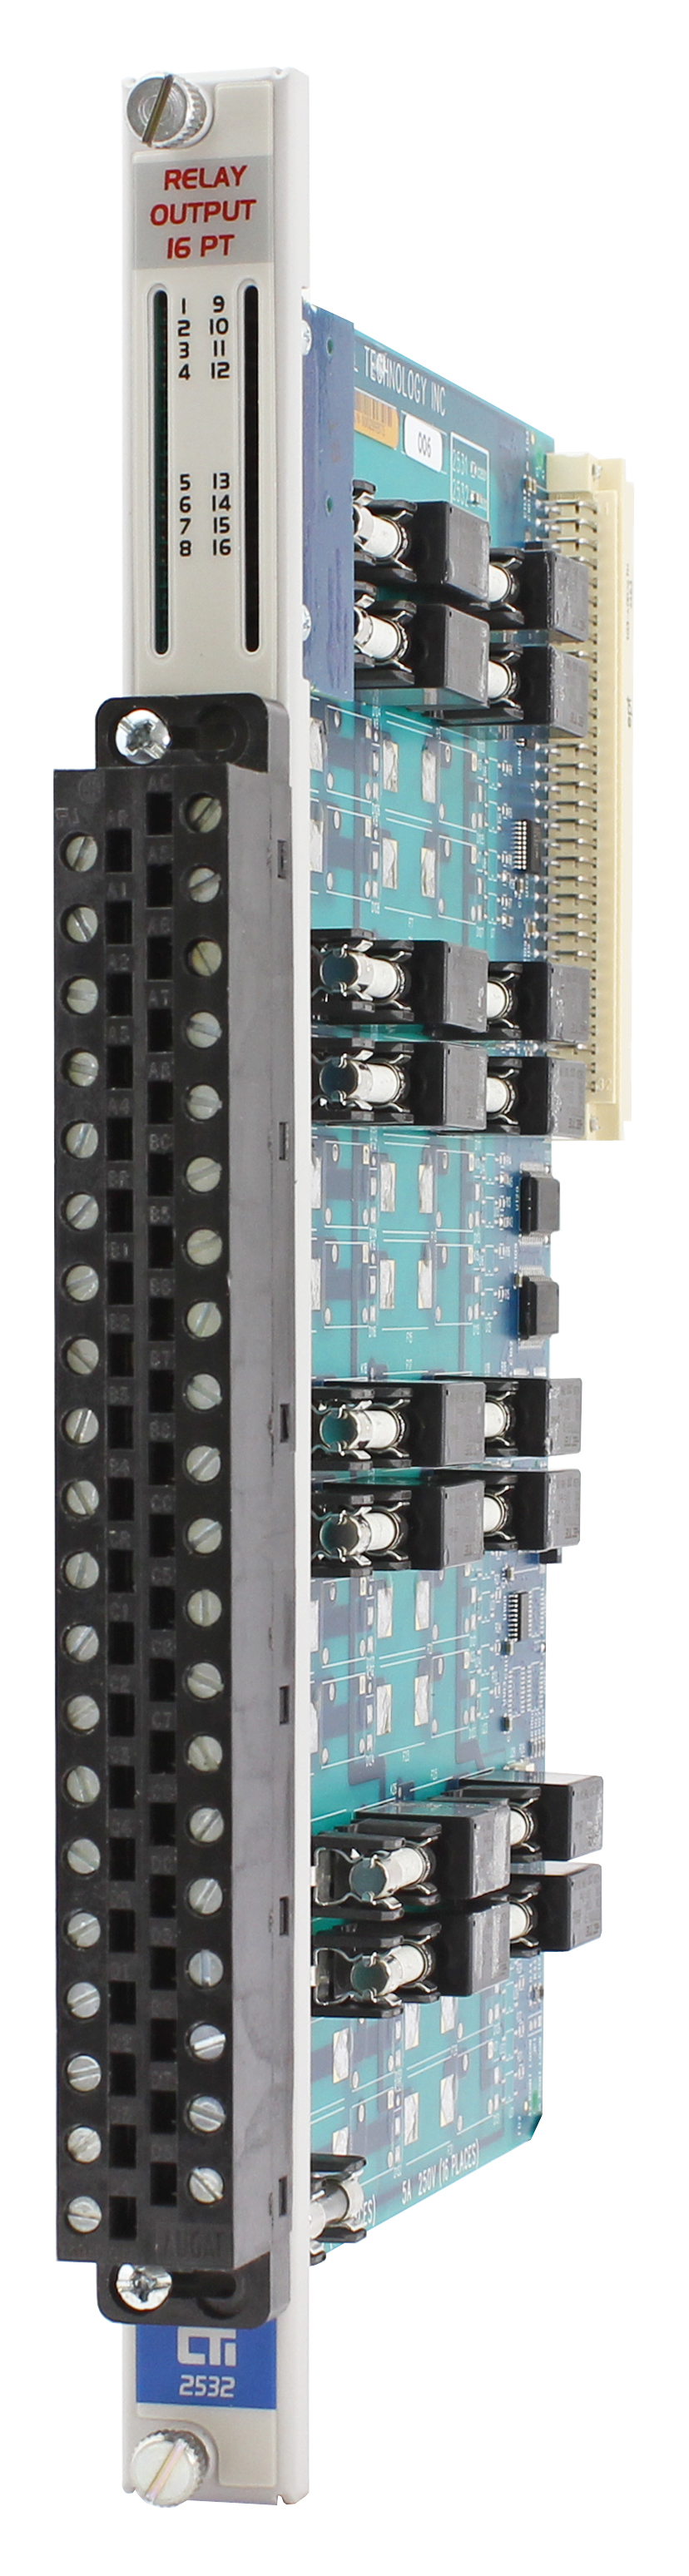 2532 16-Point Form-A Relay Output Module